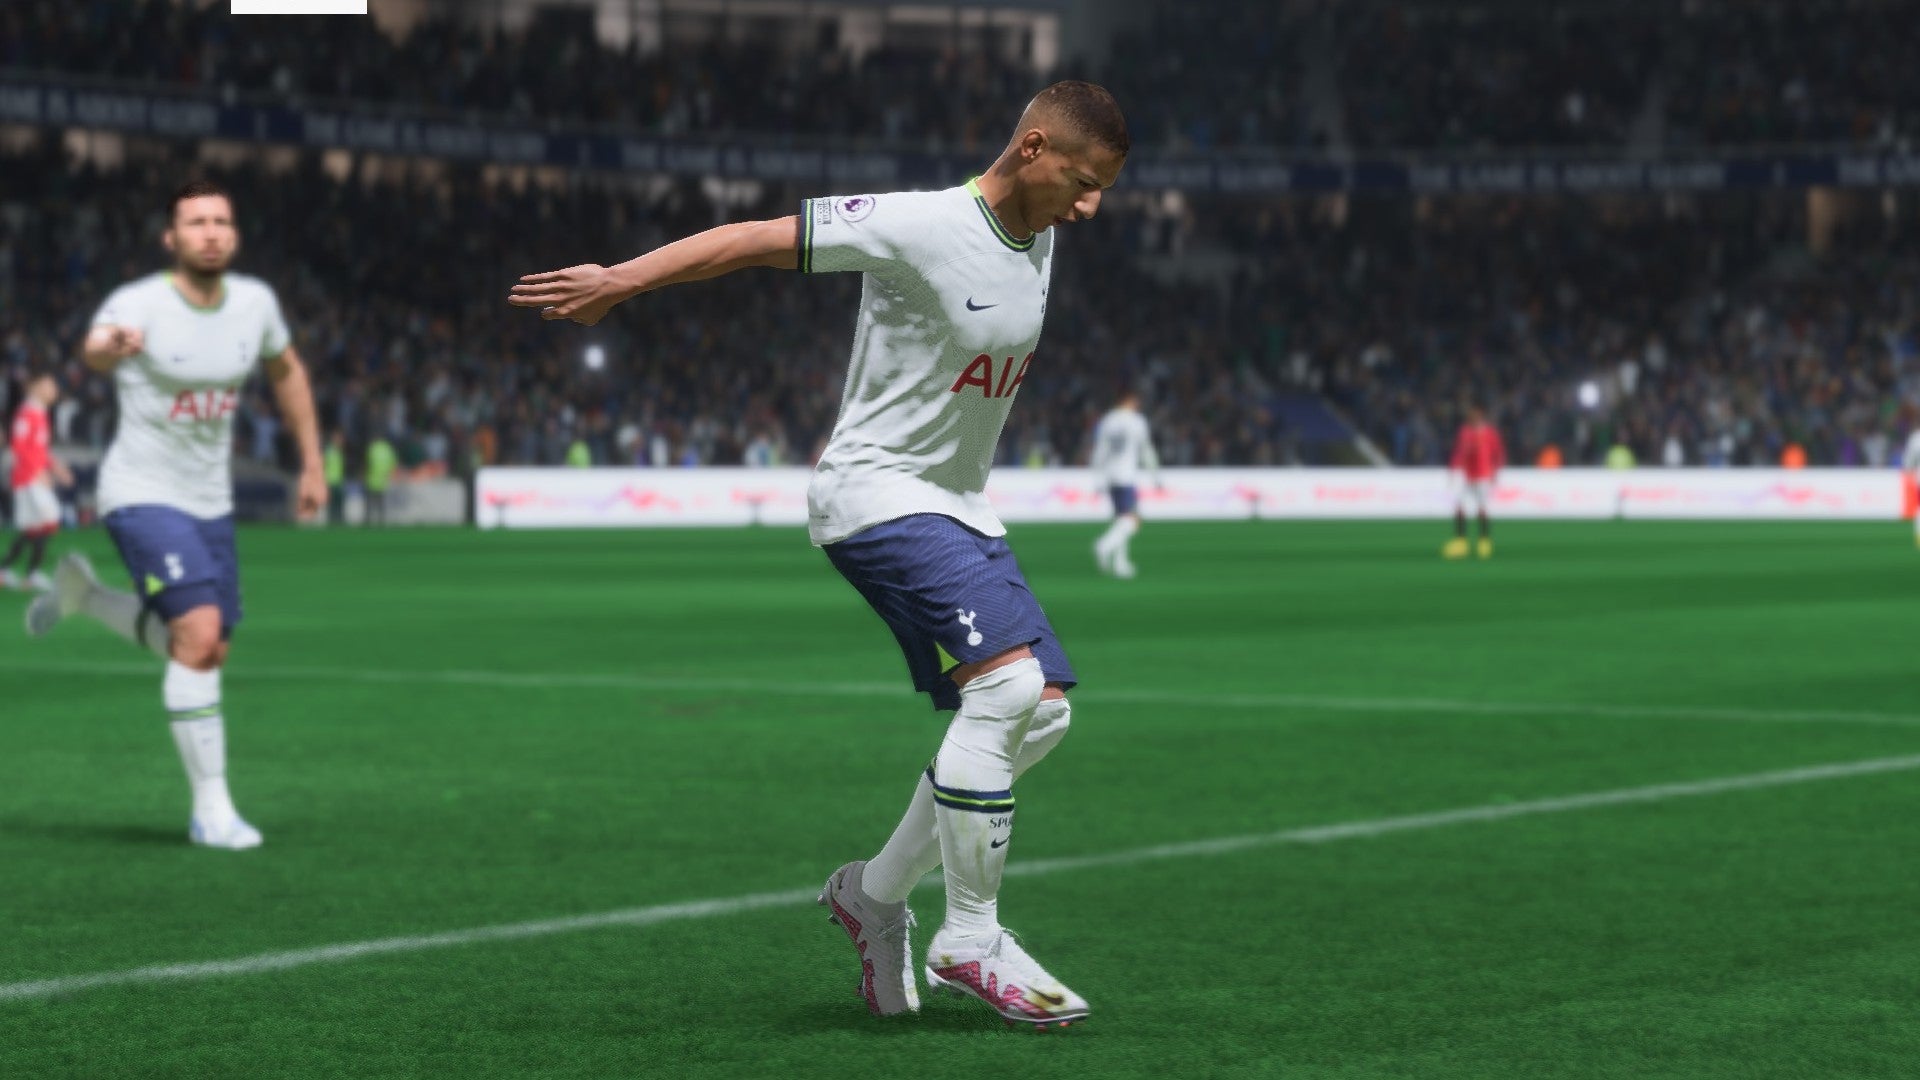 Richarlison doing the Griddy in FIFA 23.